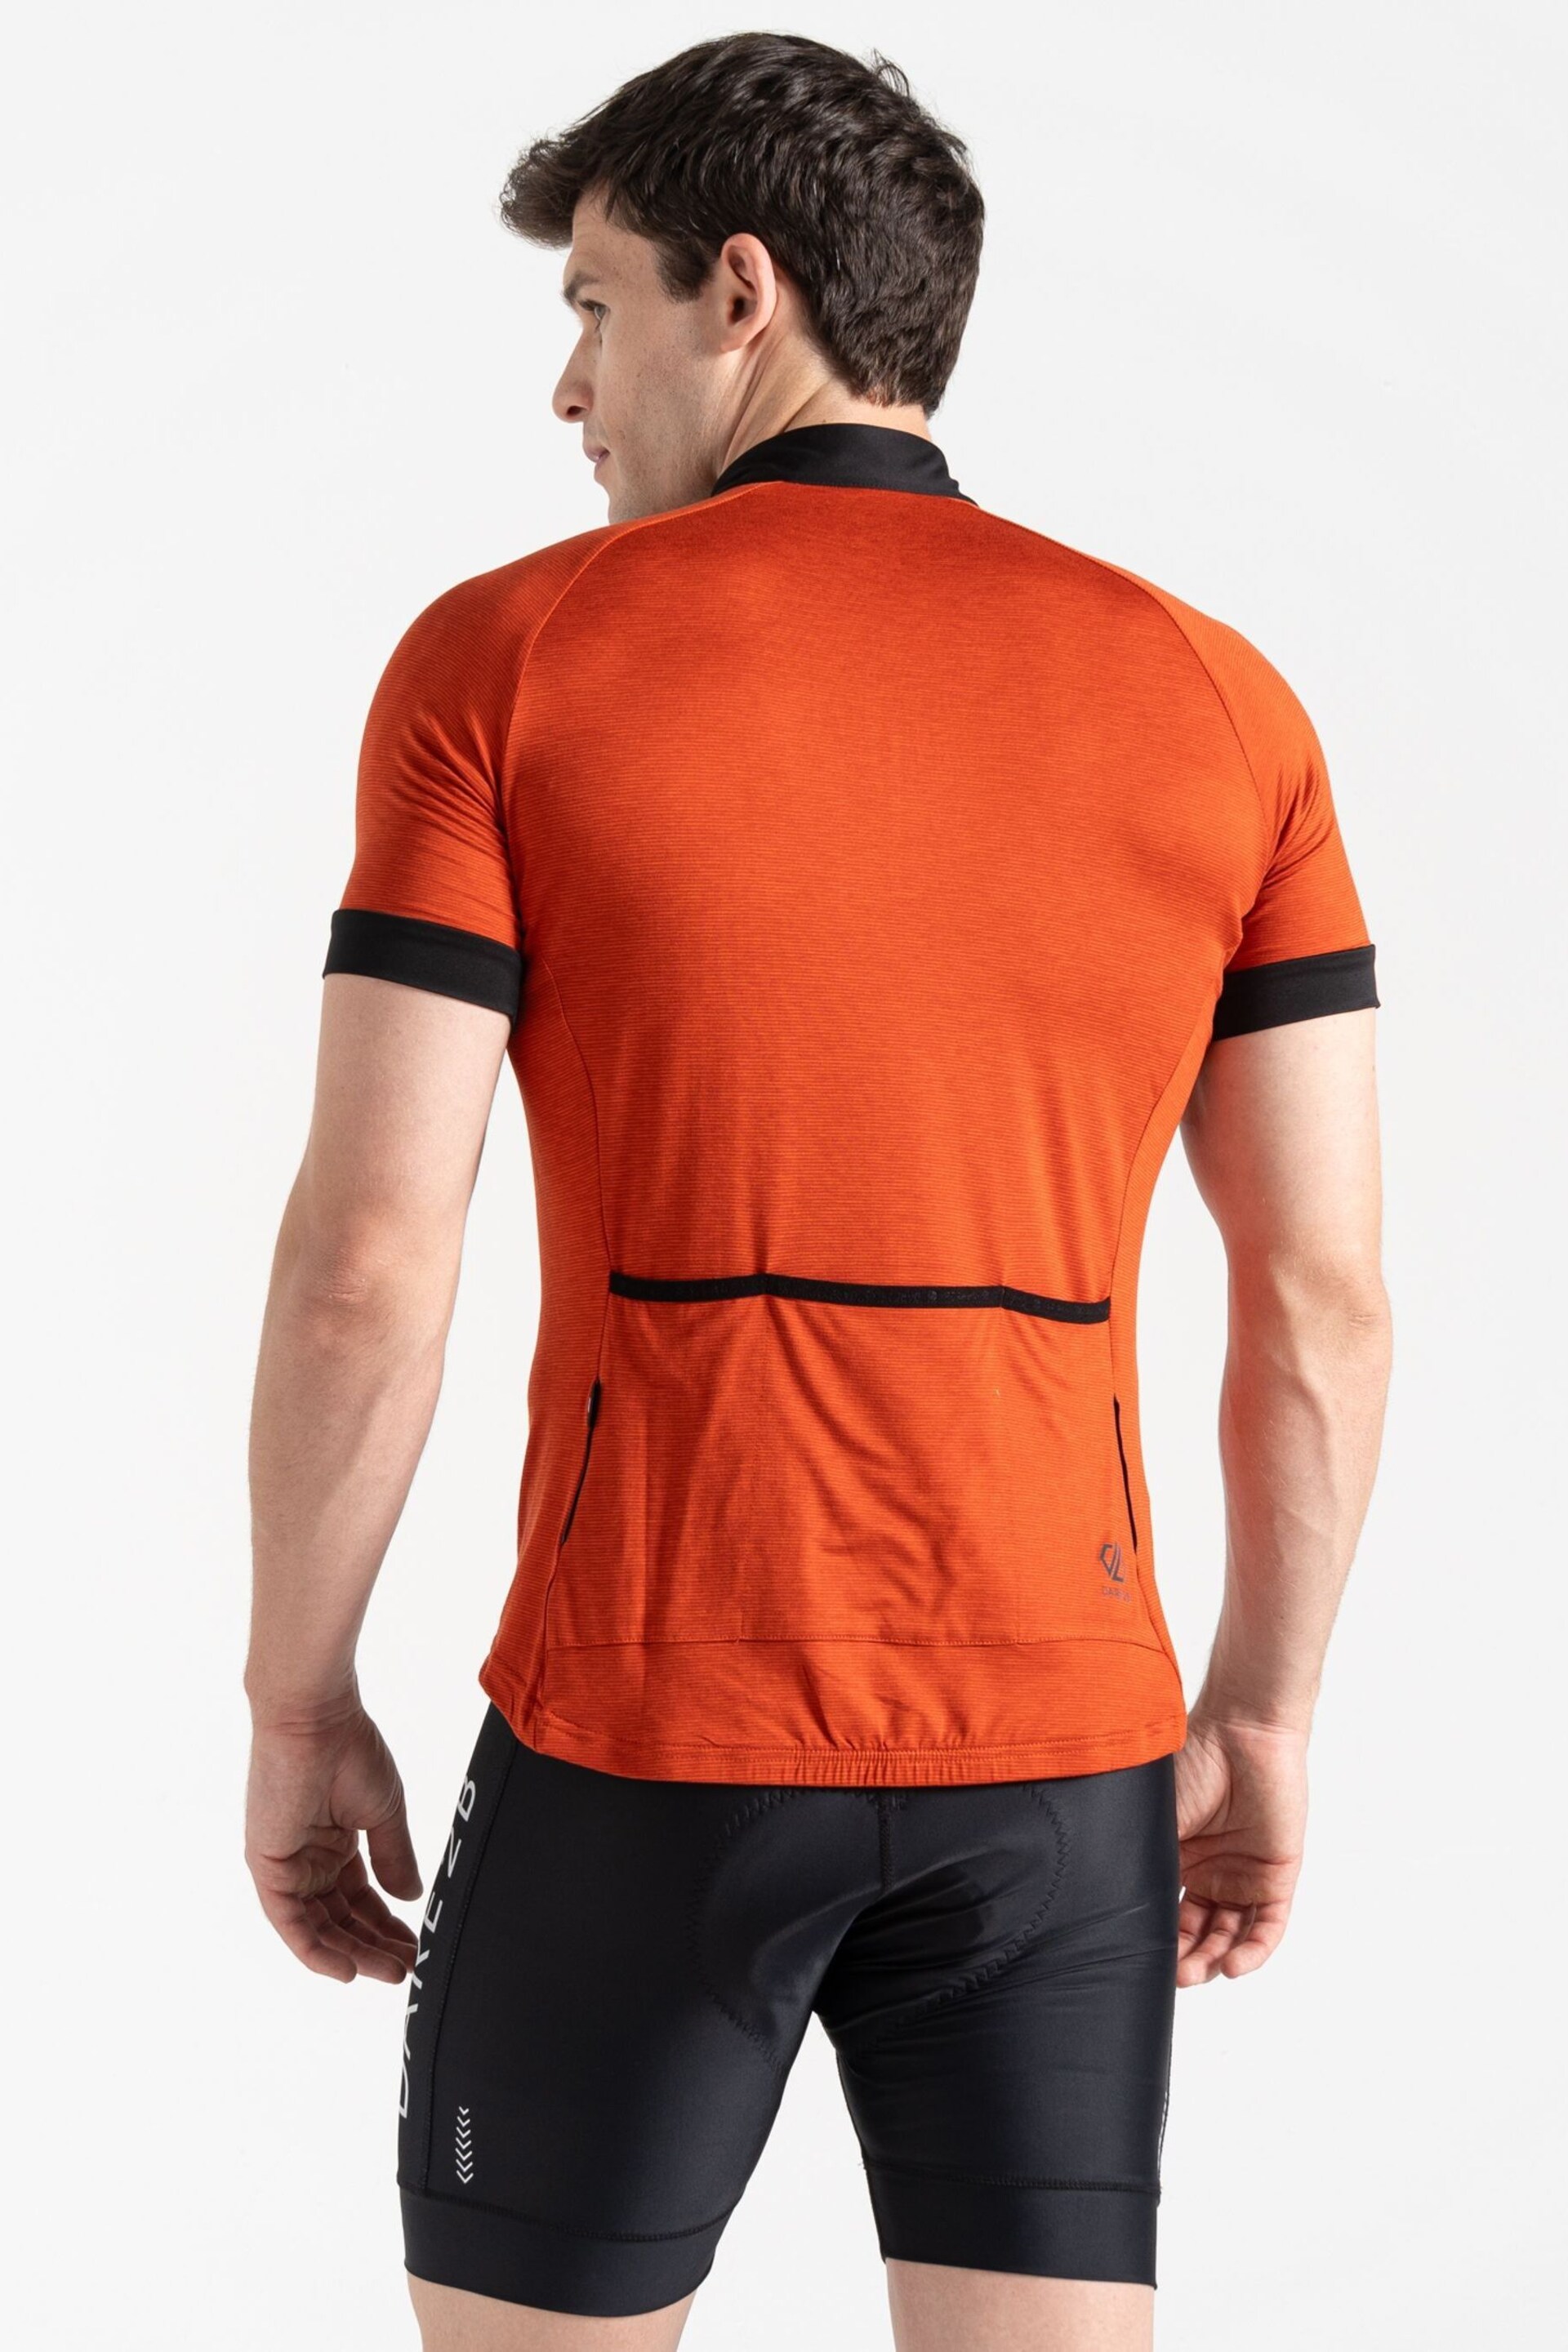 Dare 2b Orange Pedal It Out II Cycling Jersey - Image 3 of 3